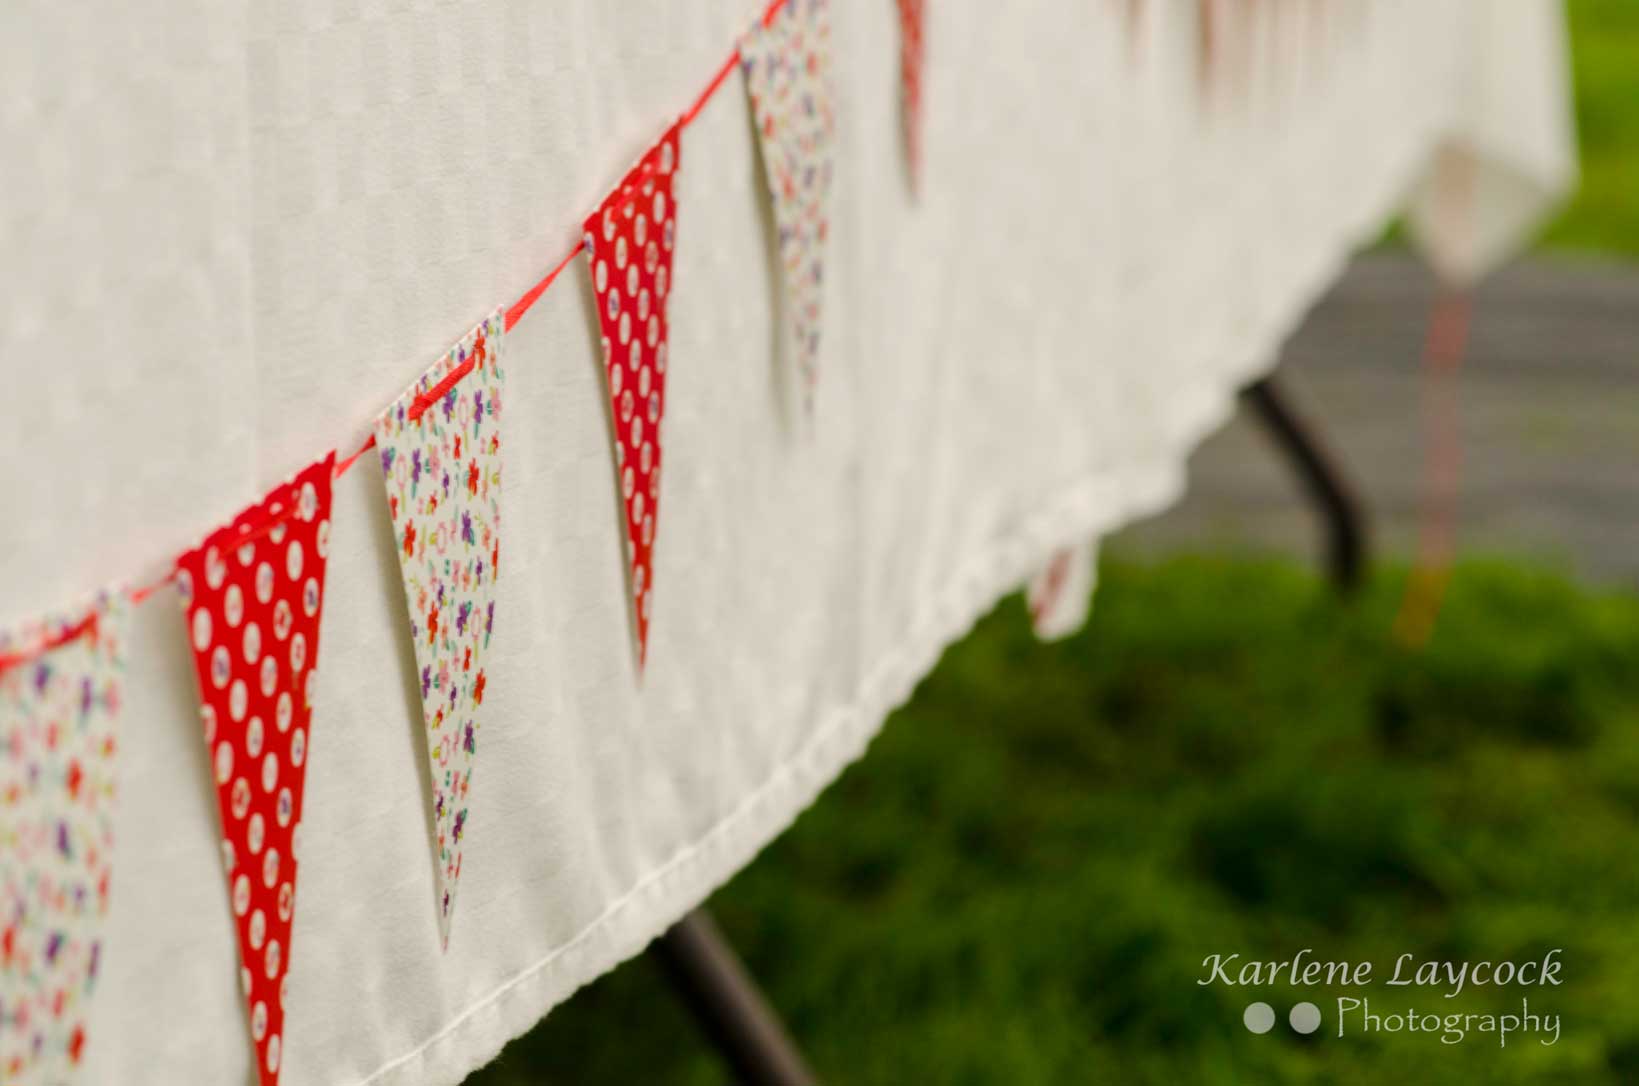 Image of Bunting taken at Local Bake Off Event